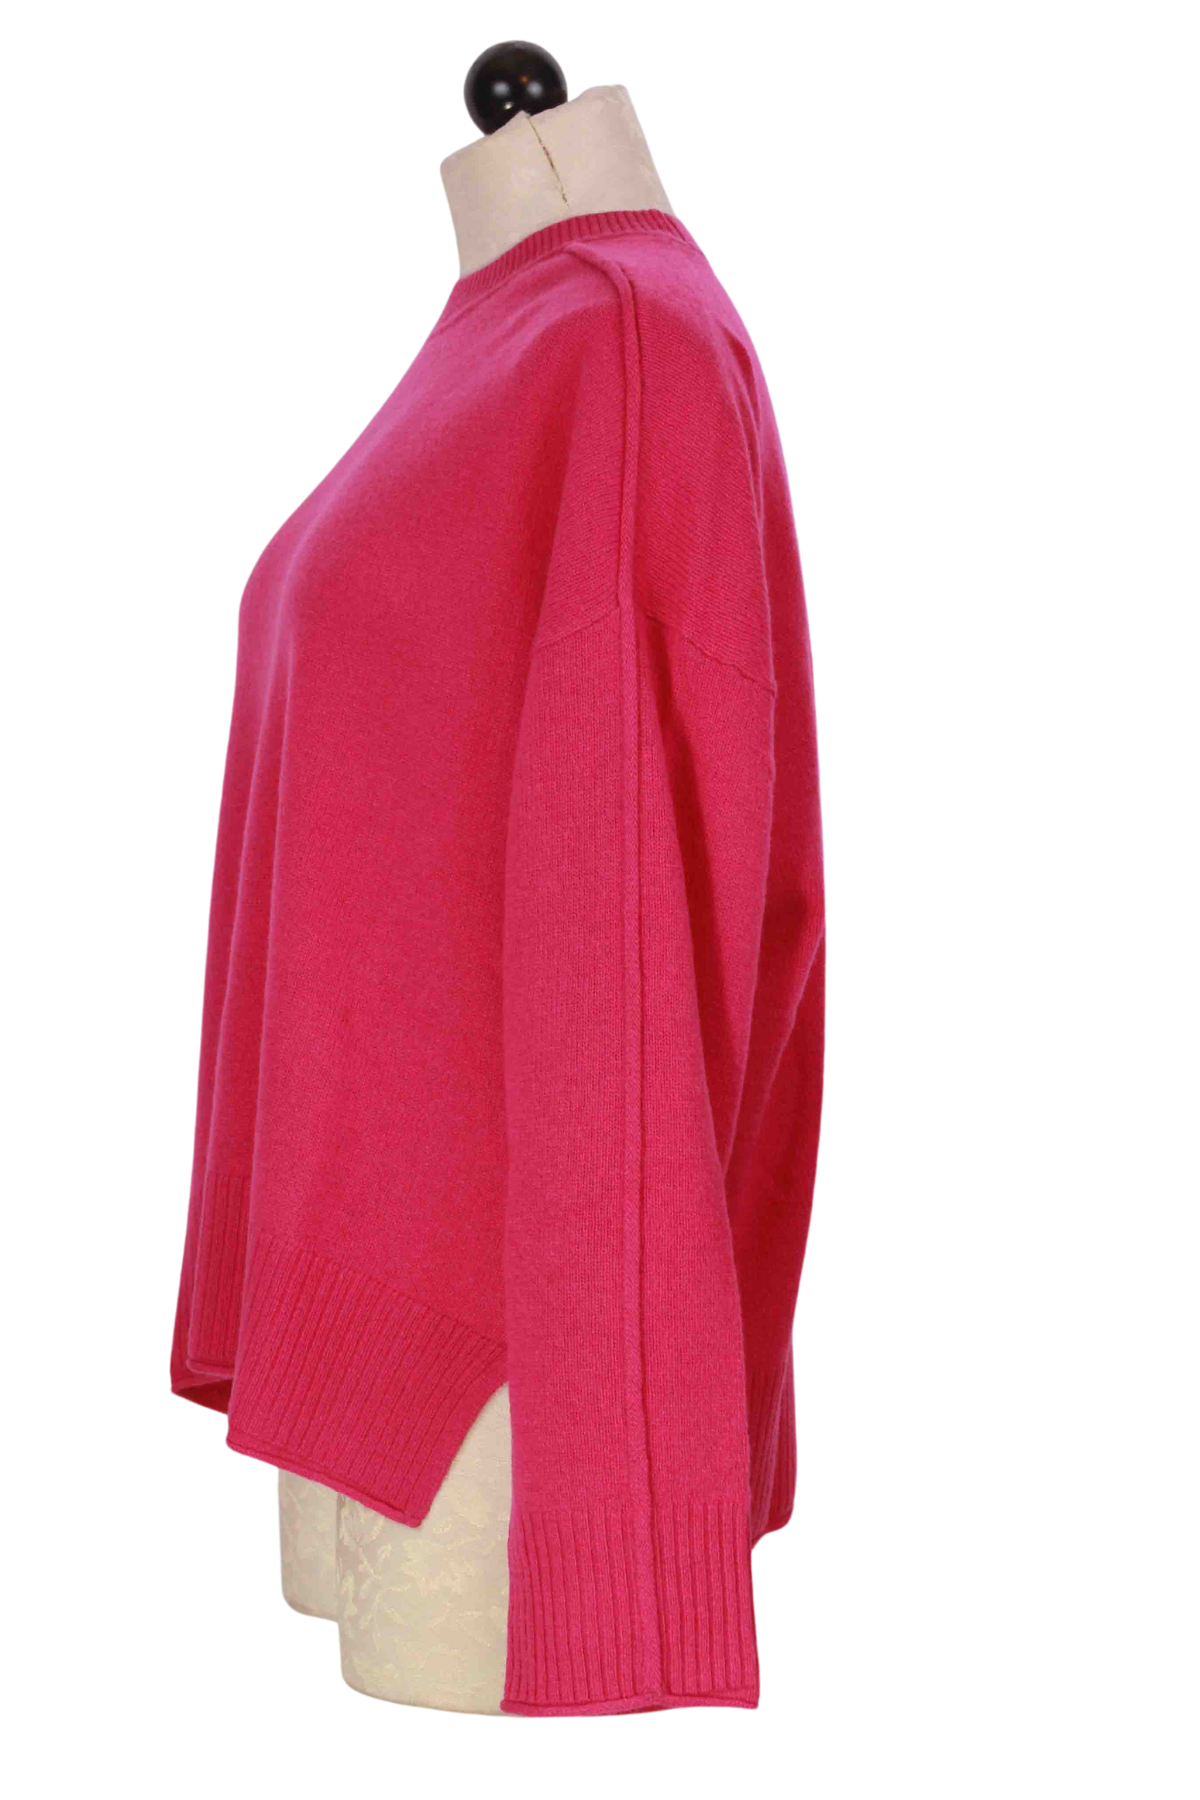 Side view of Dragon Fruit Colored Emilia Crew Neck Sweater by Alashan Cashmere